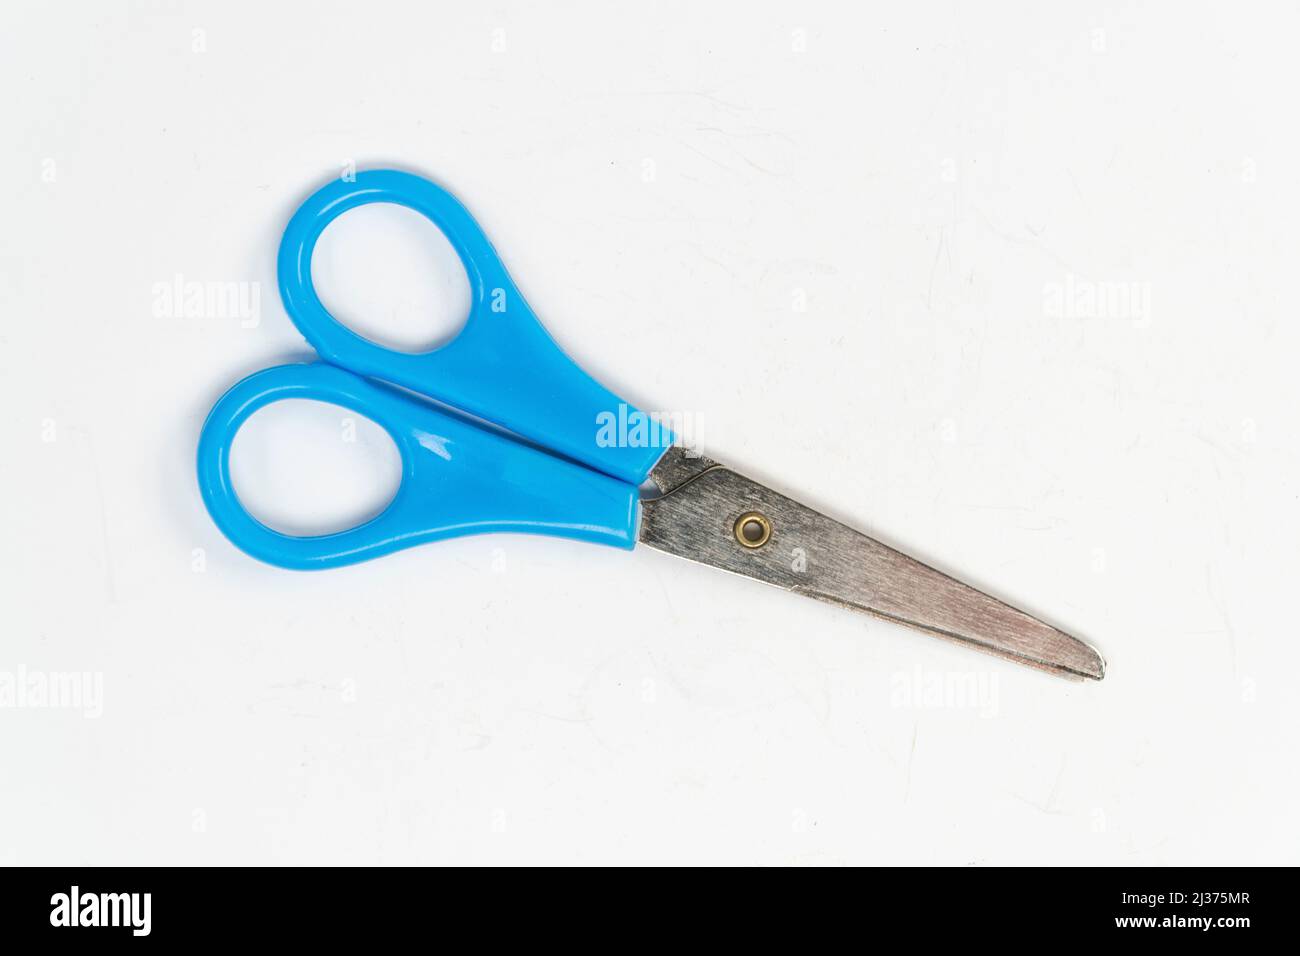 Blue scissors isolated on white background, small a pair of scissors, cutting tool top view Stock Photo